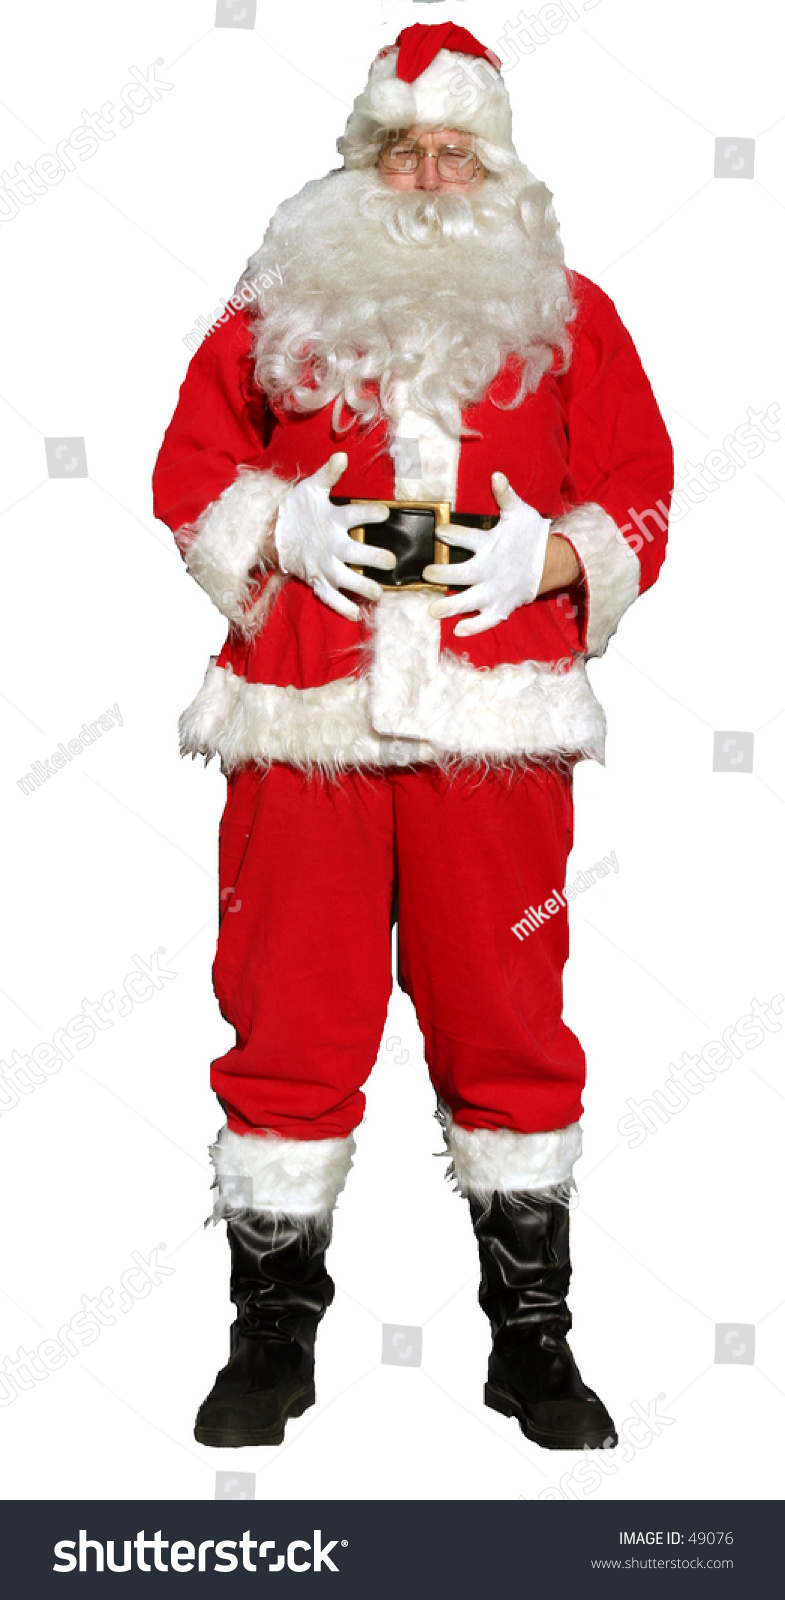 stock-photo-isolated-santa-stands-with-his-hands-on-his-tummy-as-if-to-say-ho-ho-ho-those-were-some-fine-49076.jpg